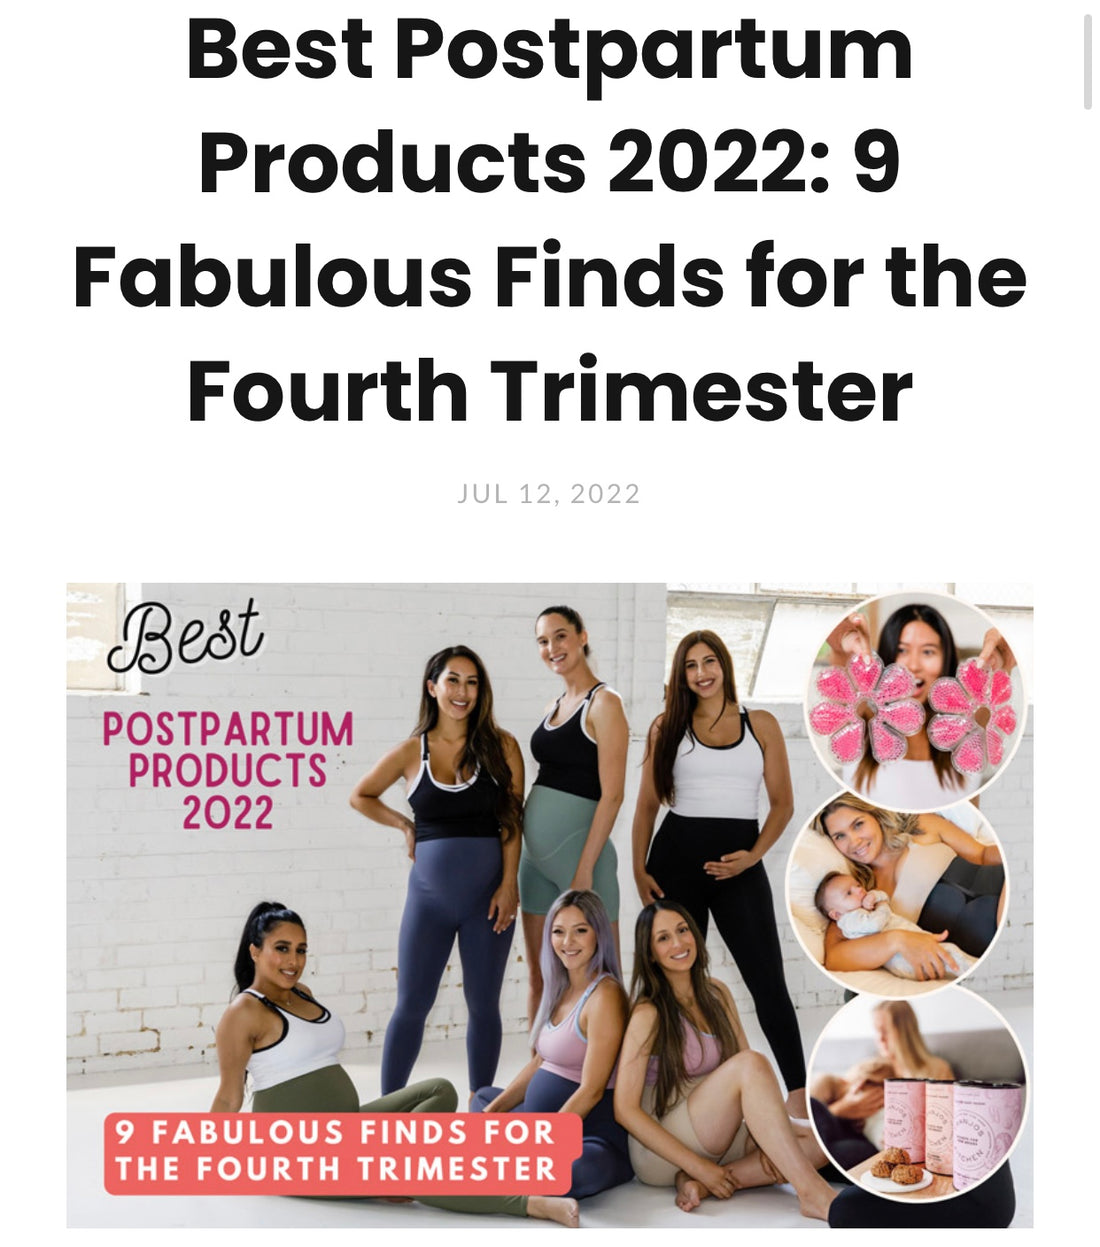 Emamaco’s Pregnancy Recovery leggings make best Postpartum products list 2022